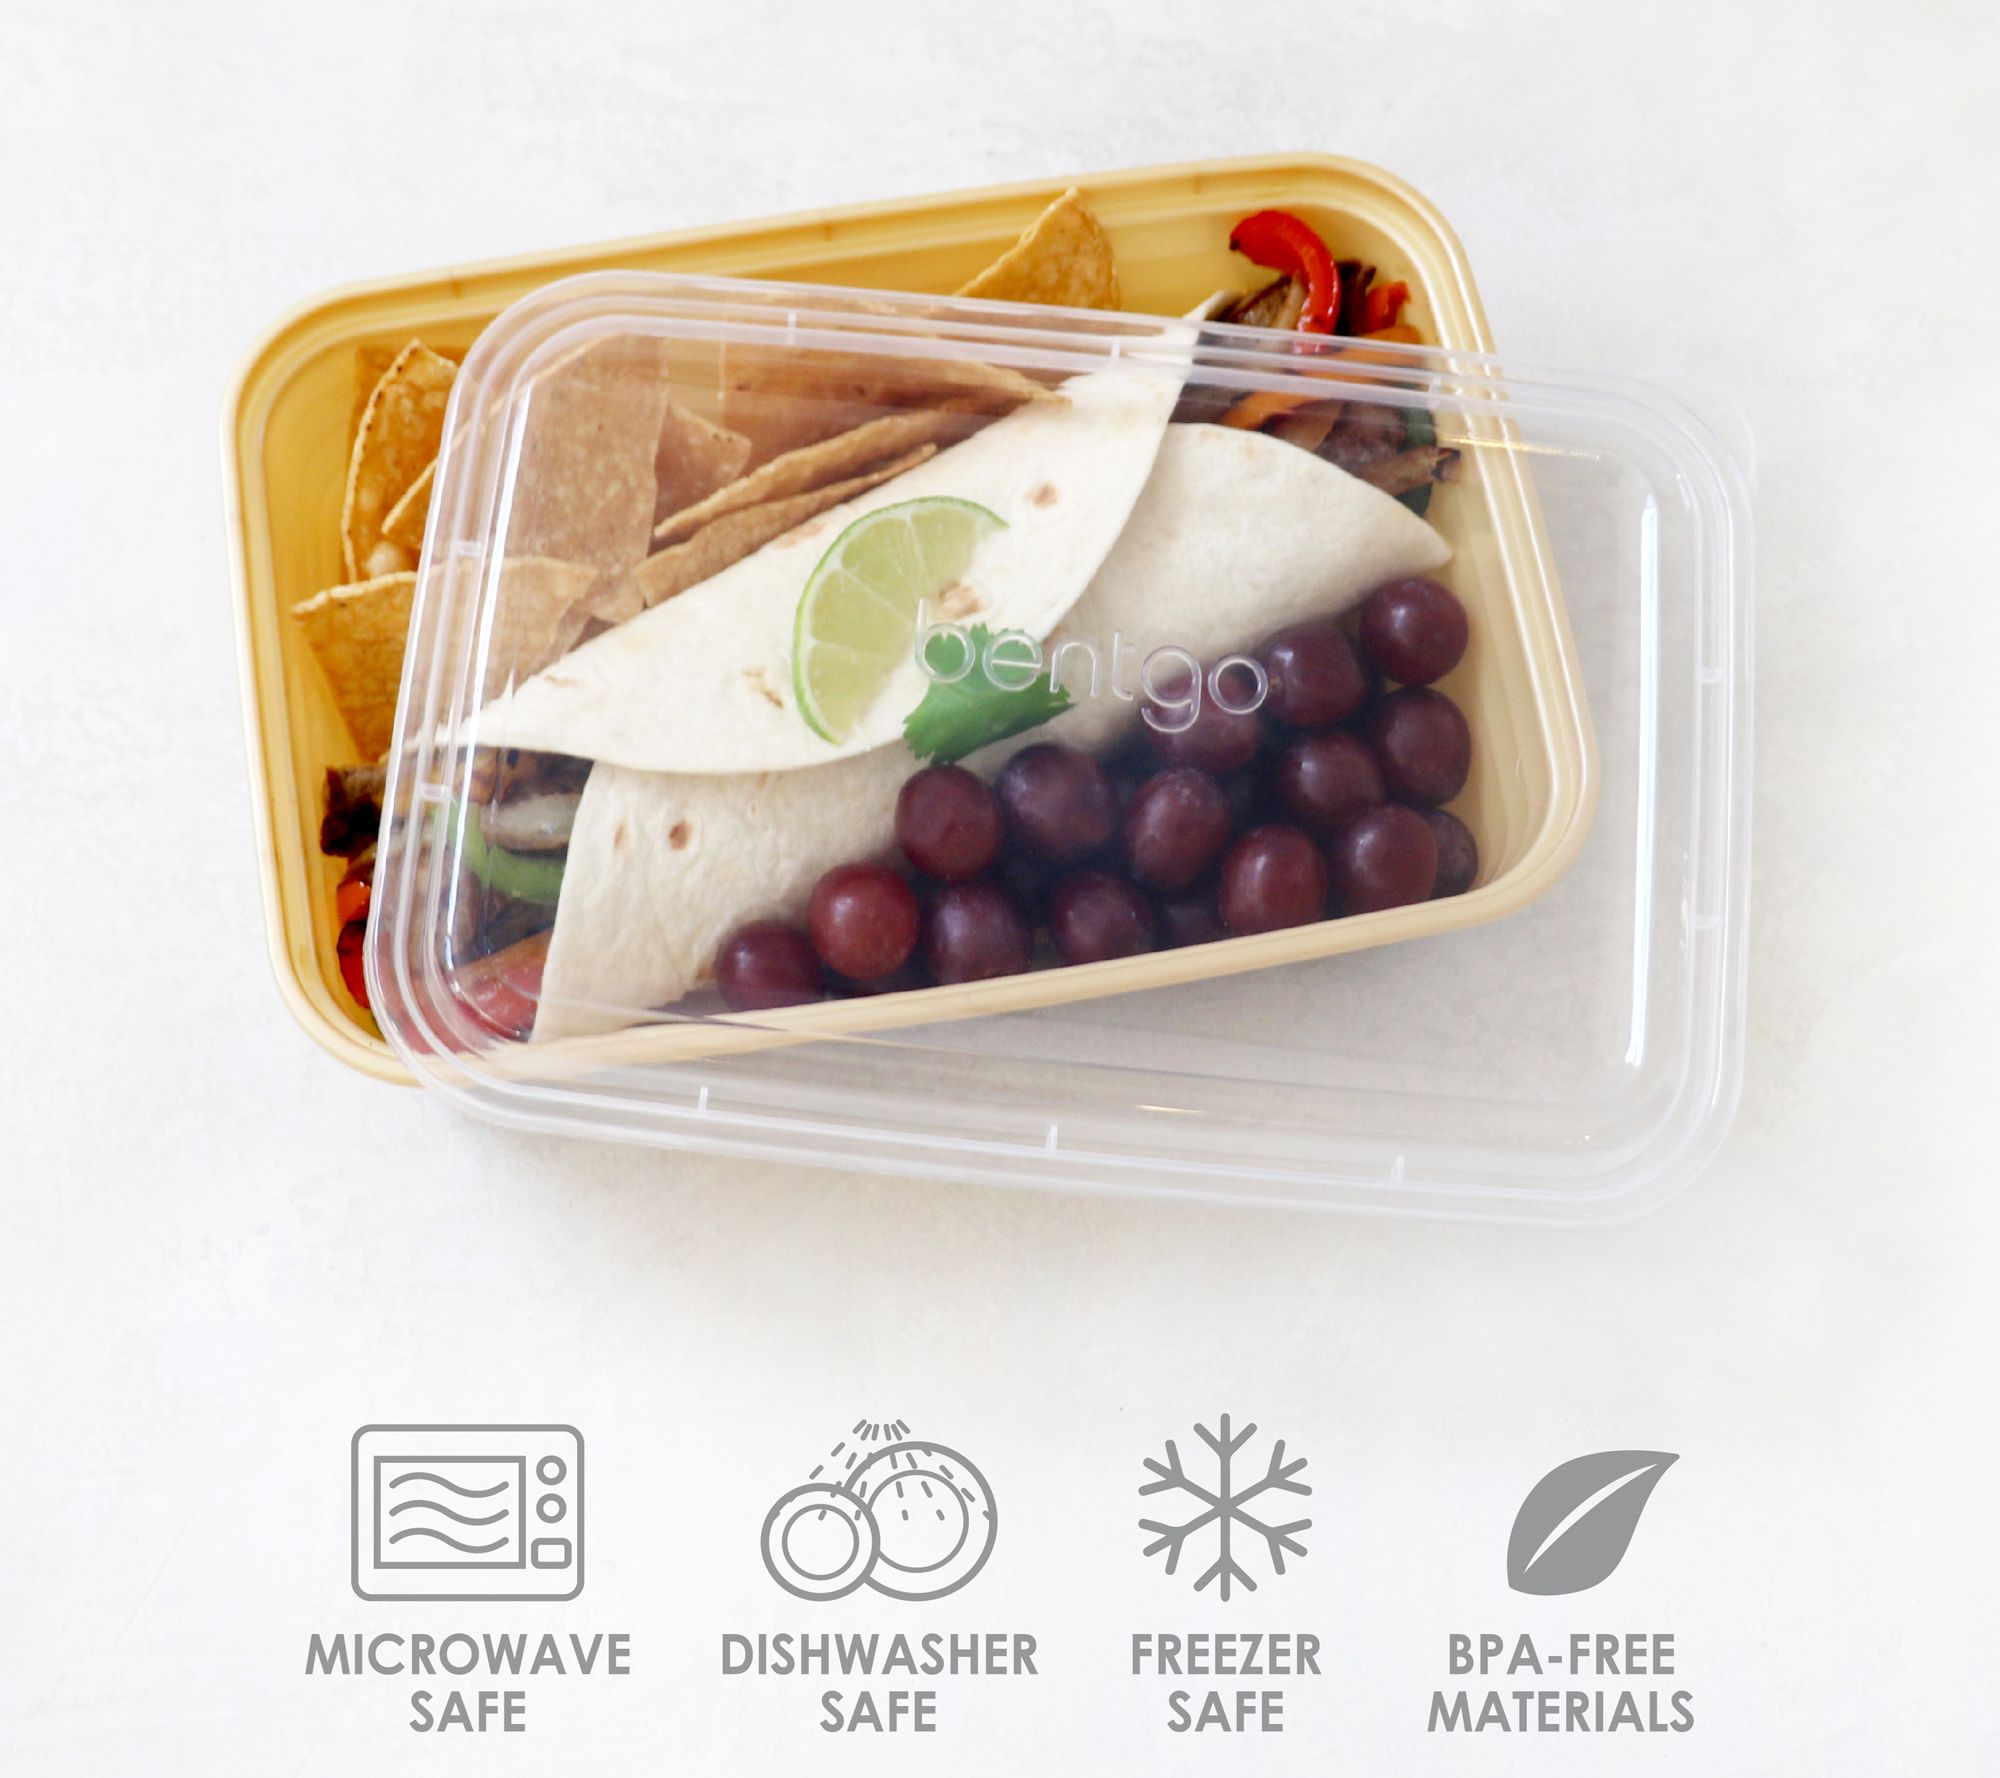 Bentgo Prep 10-Pack 1-Compartment Meal Prep Container 